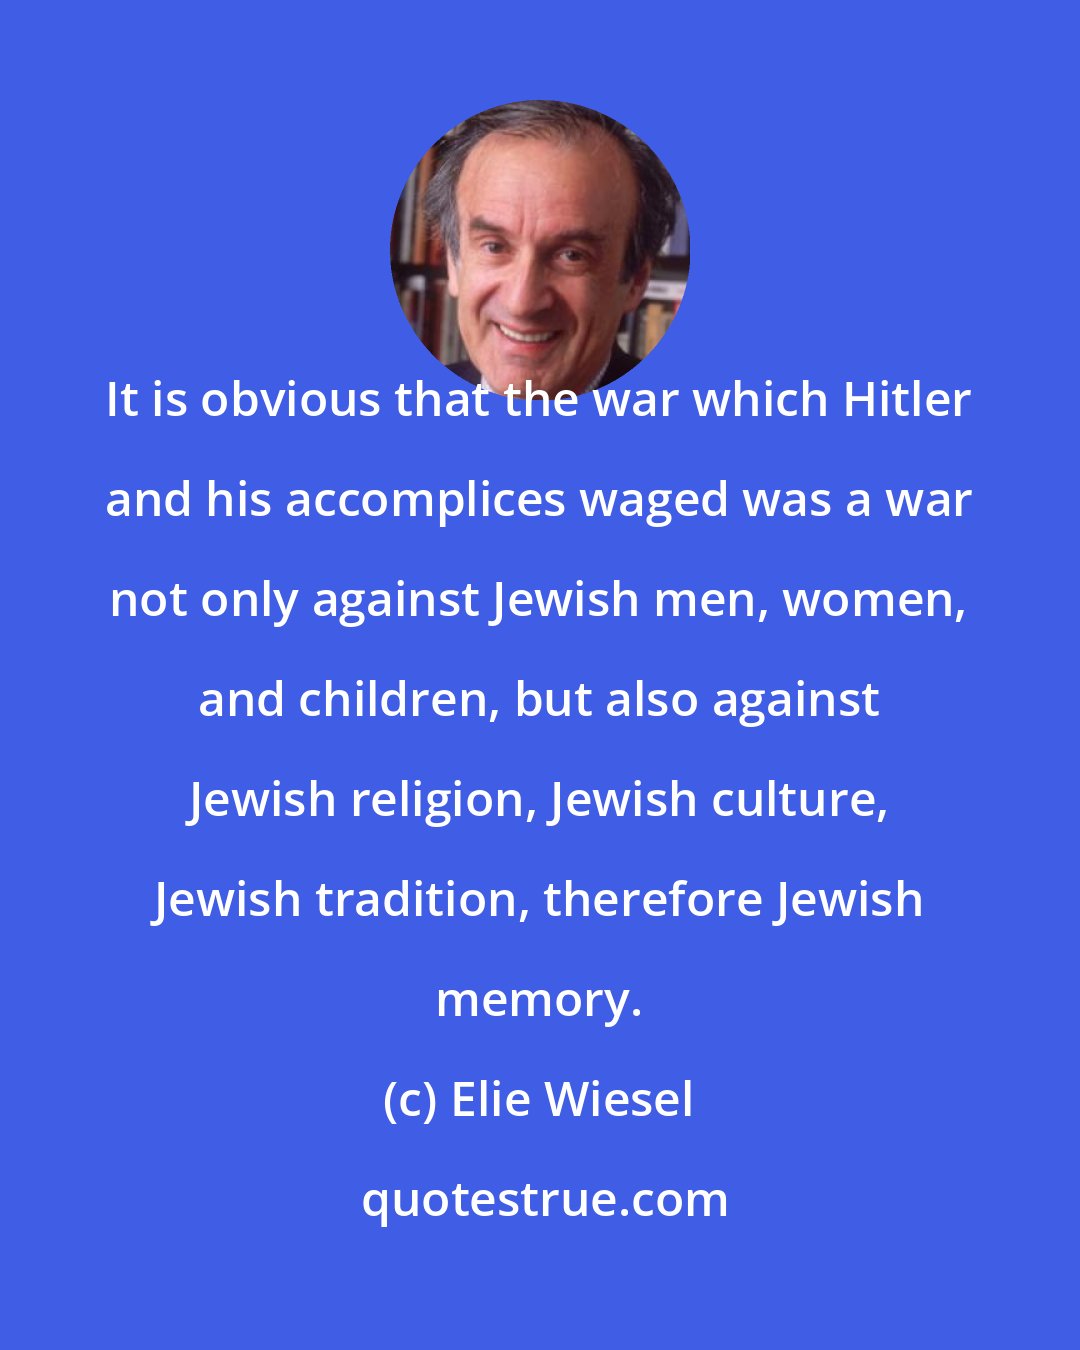 Elie Wiesel: It is obvious that the war which Hitler and his accomplices waged was a war not only against Jewish men, women, and children, but also against Jewish religion, Jewish culture, Jewish tradition, therefore Jewish memory.